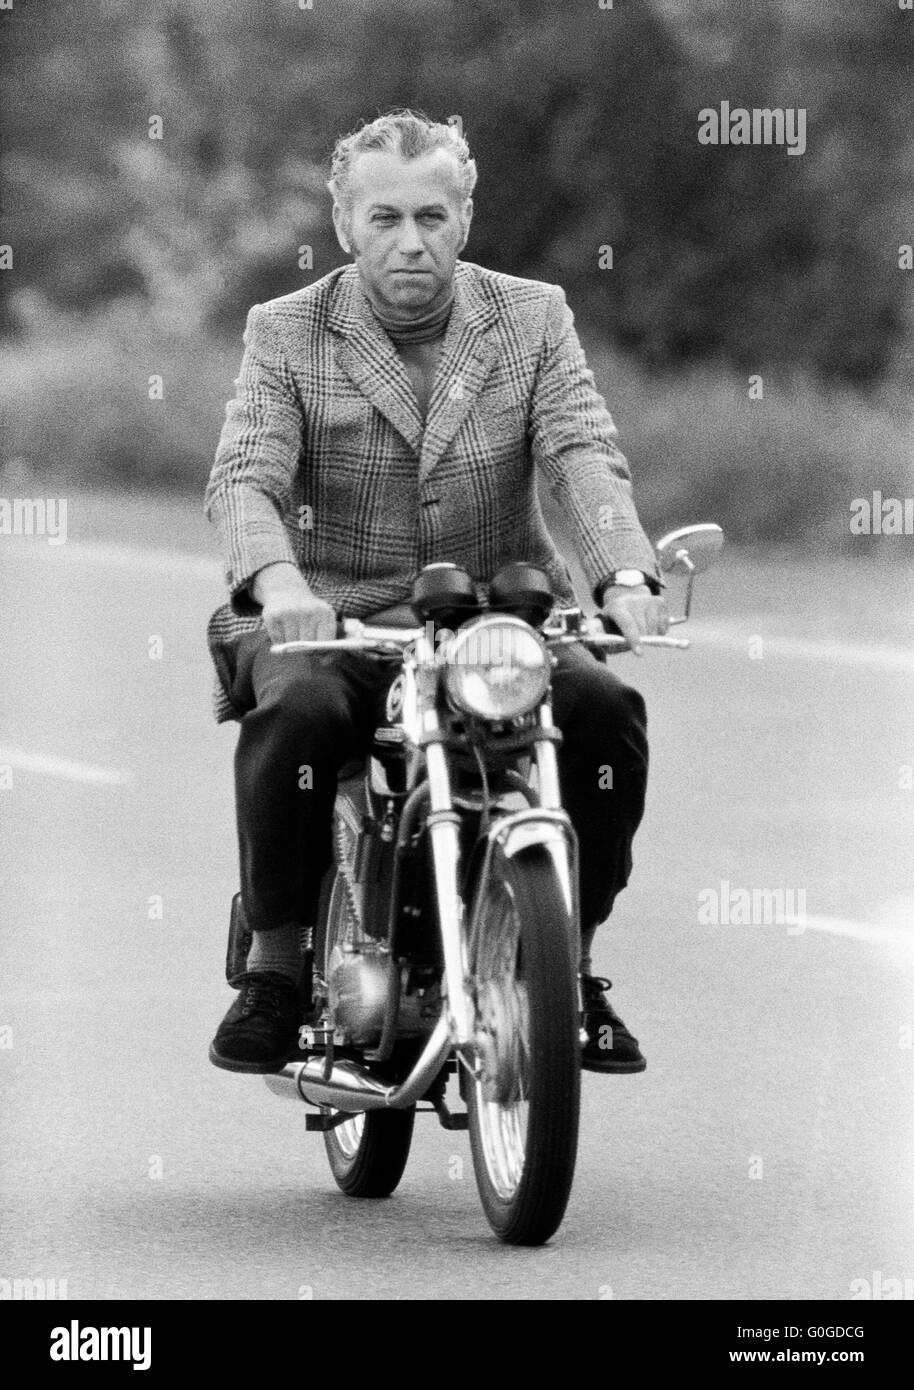 Seventies, black and white photo, people, man 40 to 50 years driving on a country road by motorbike Stock Photo